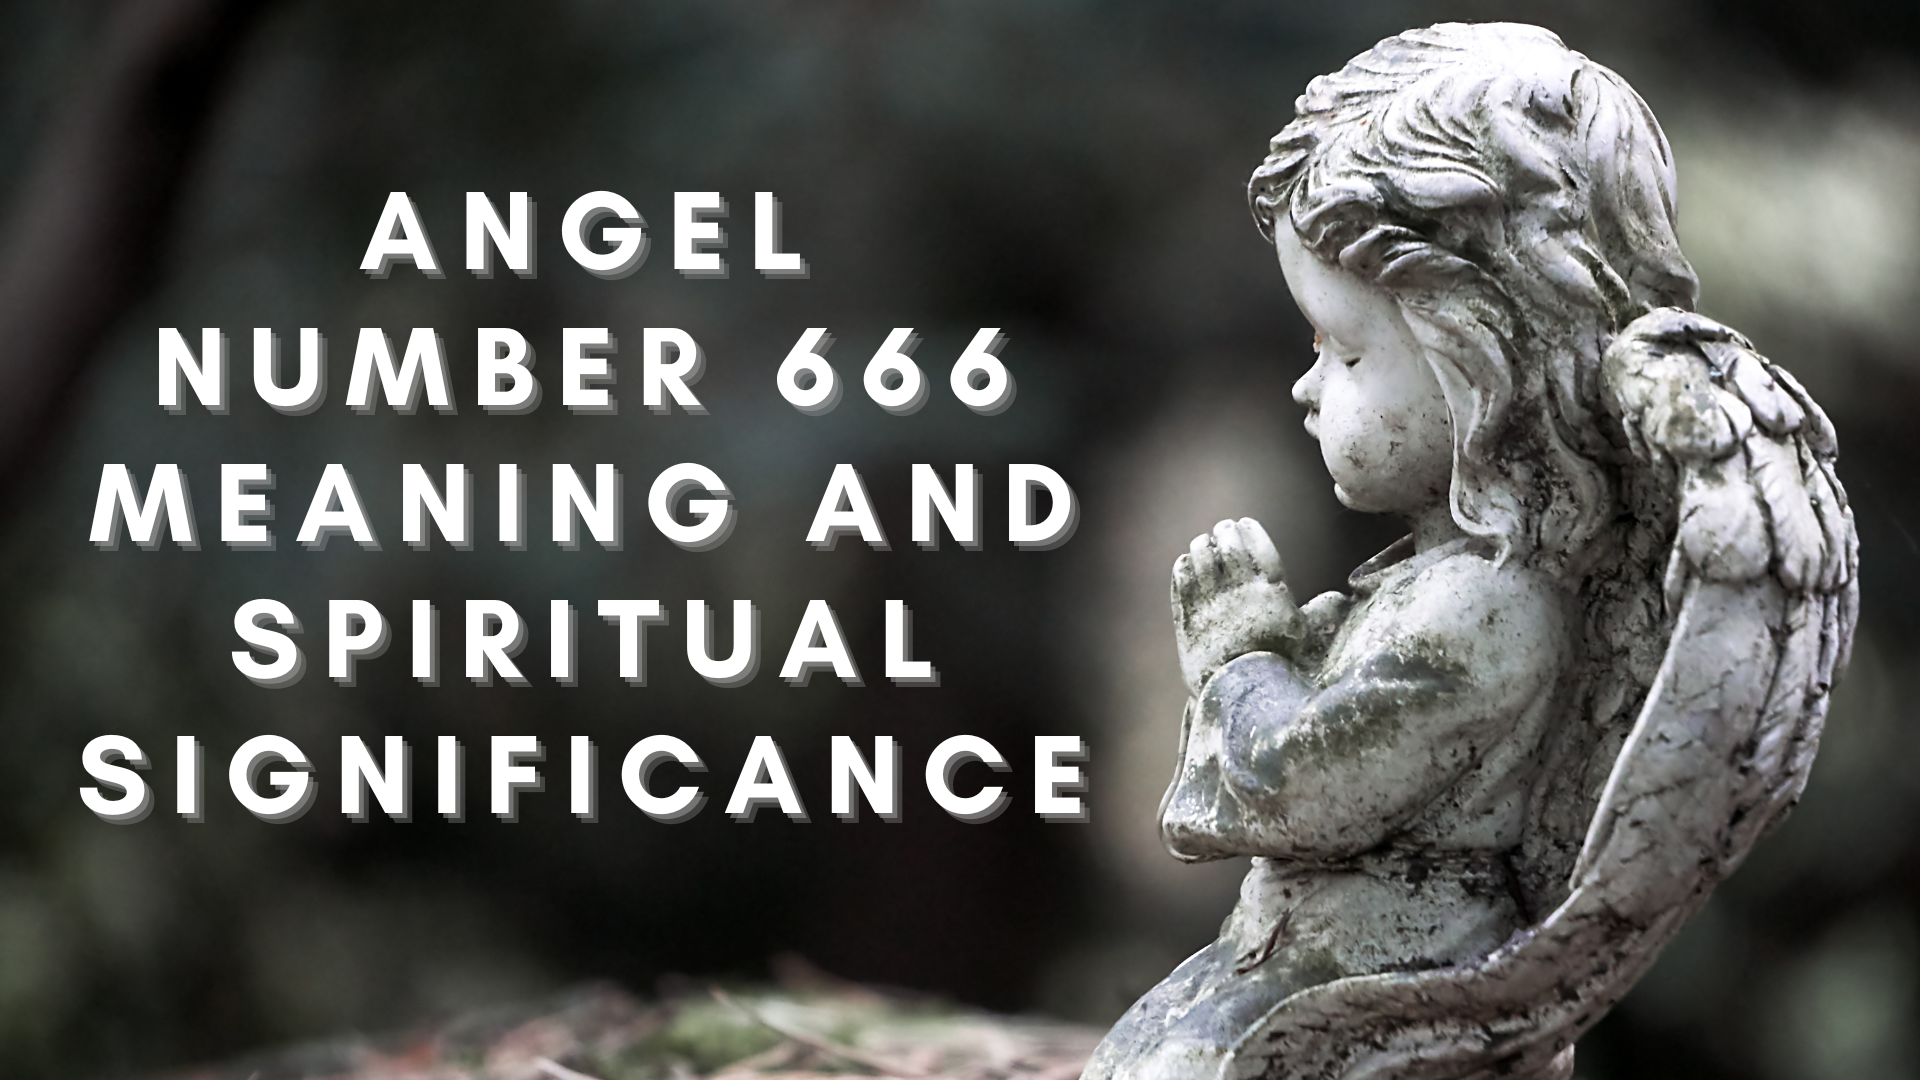 A praying angel statue with words Angel Number 666 Meaning And Spiritual Significance